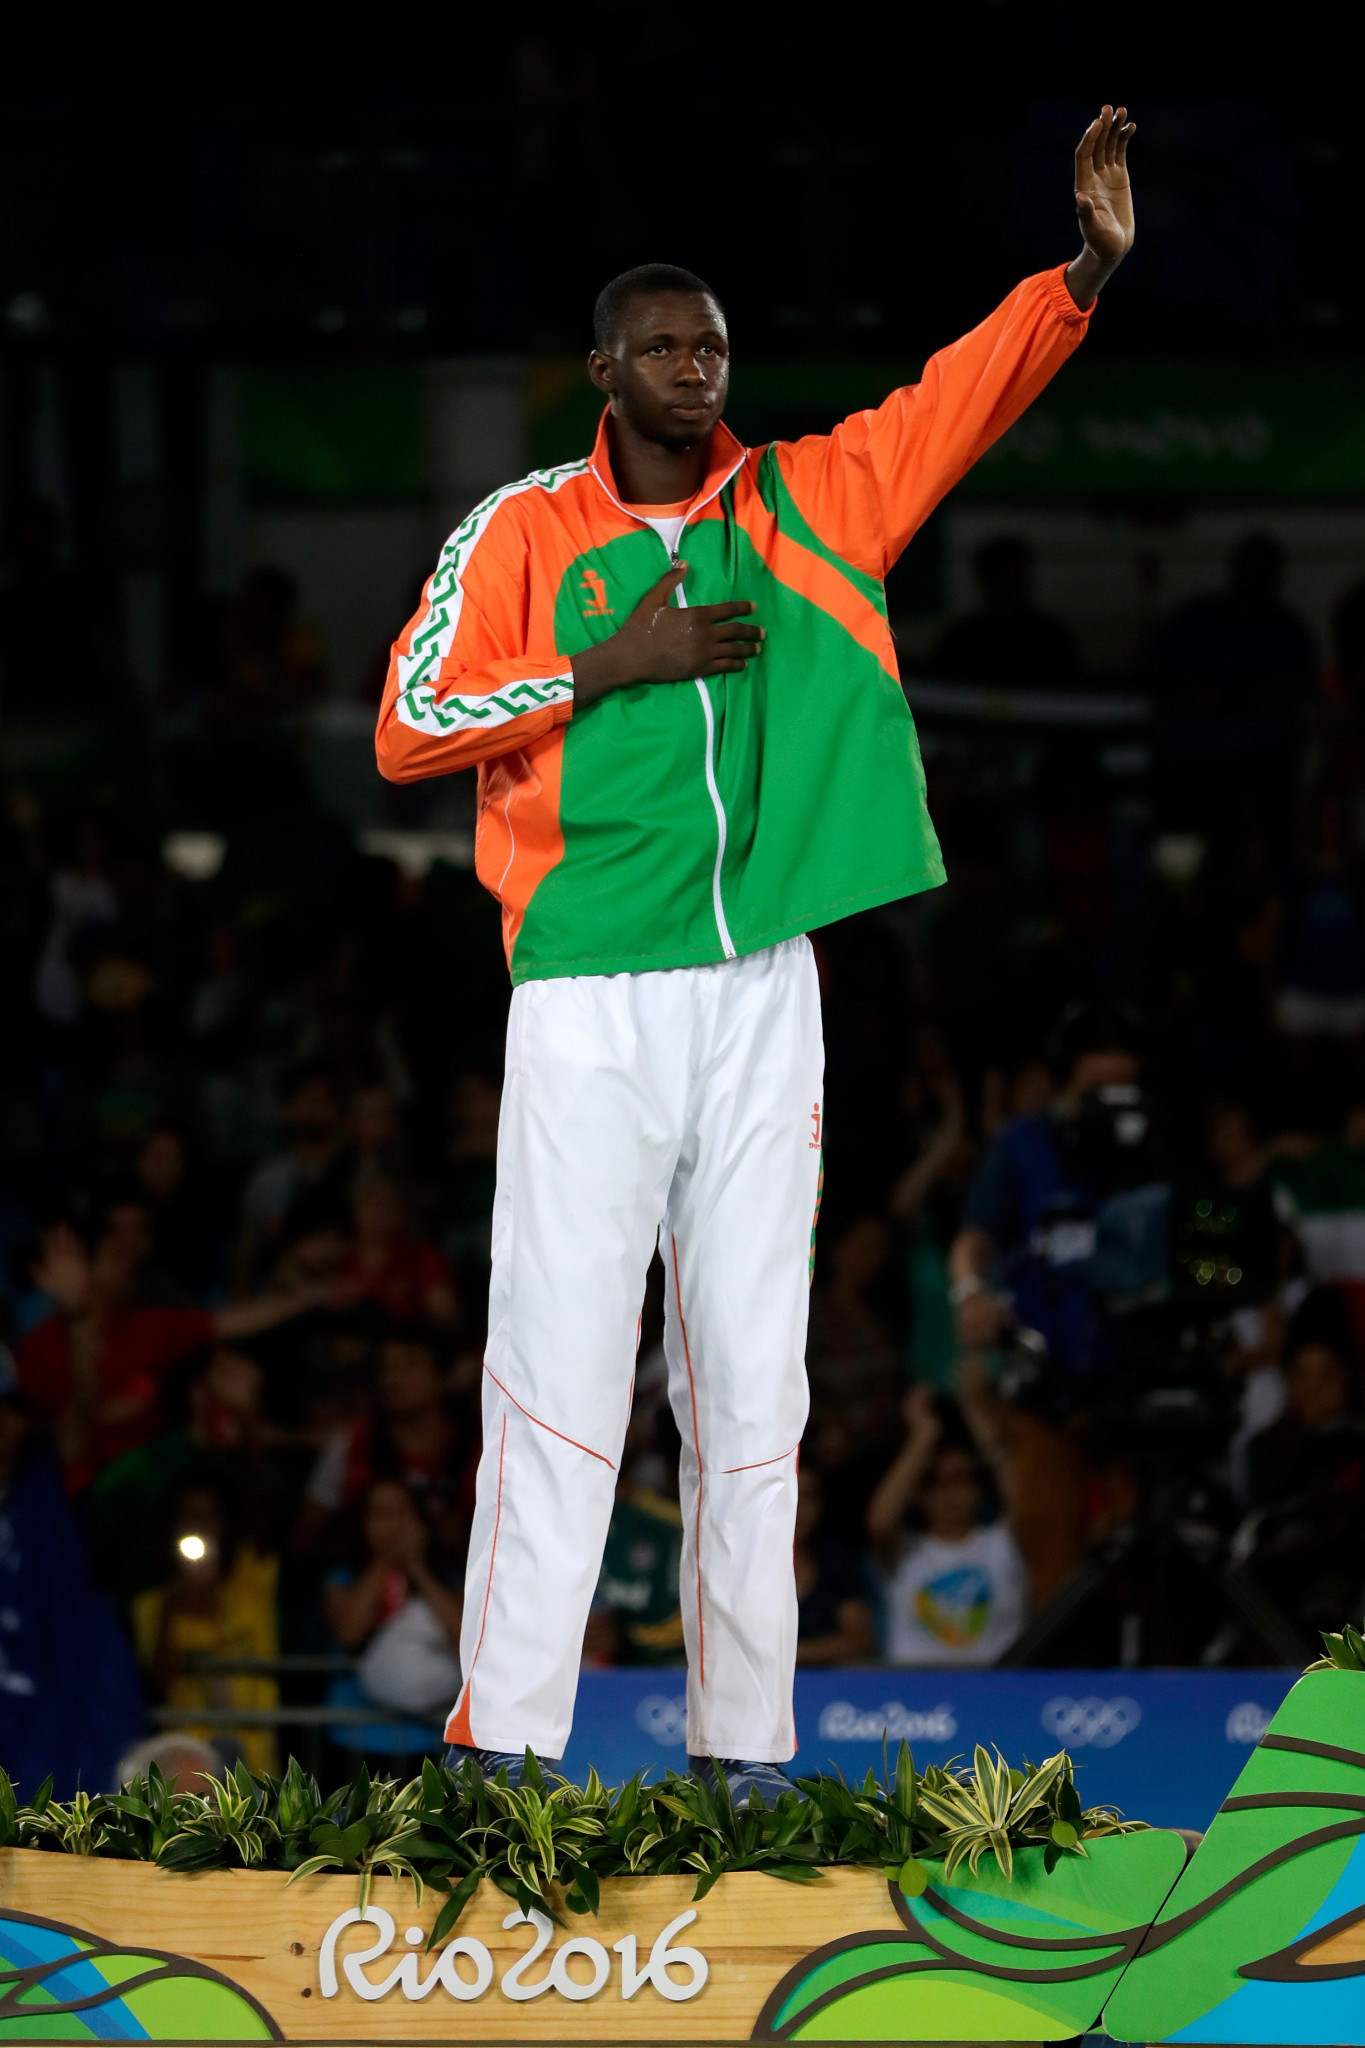 Taekwondo star Issoufou aiming to win Niger’s first Olympic gold at Tokyo 2020